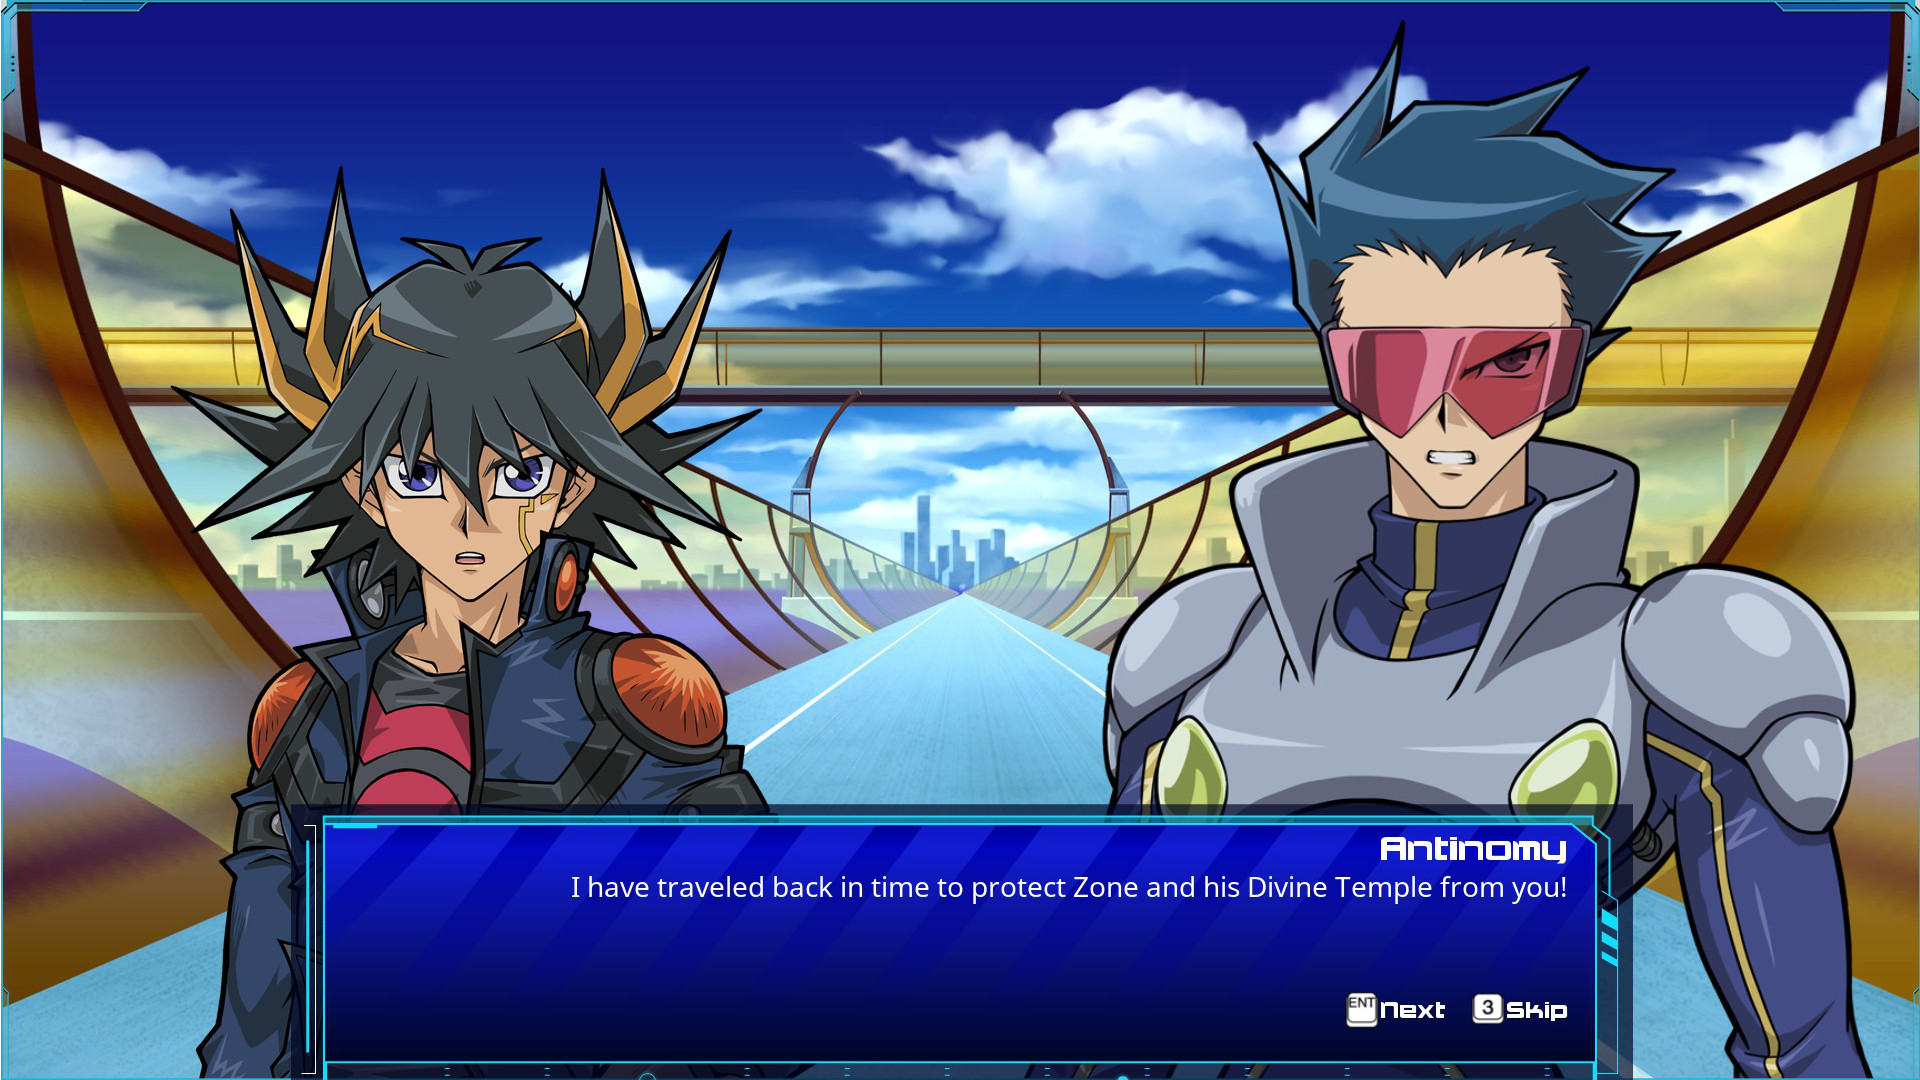 Yu-Gi-Oh! - 5D’s For the Future DLC Steam CD Key, 1.04$